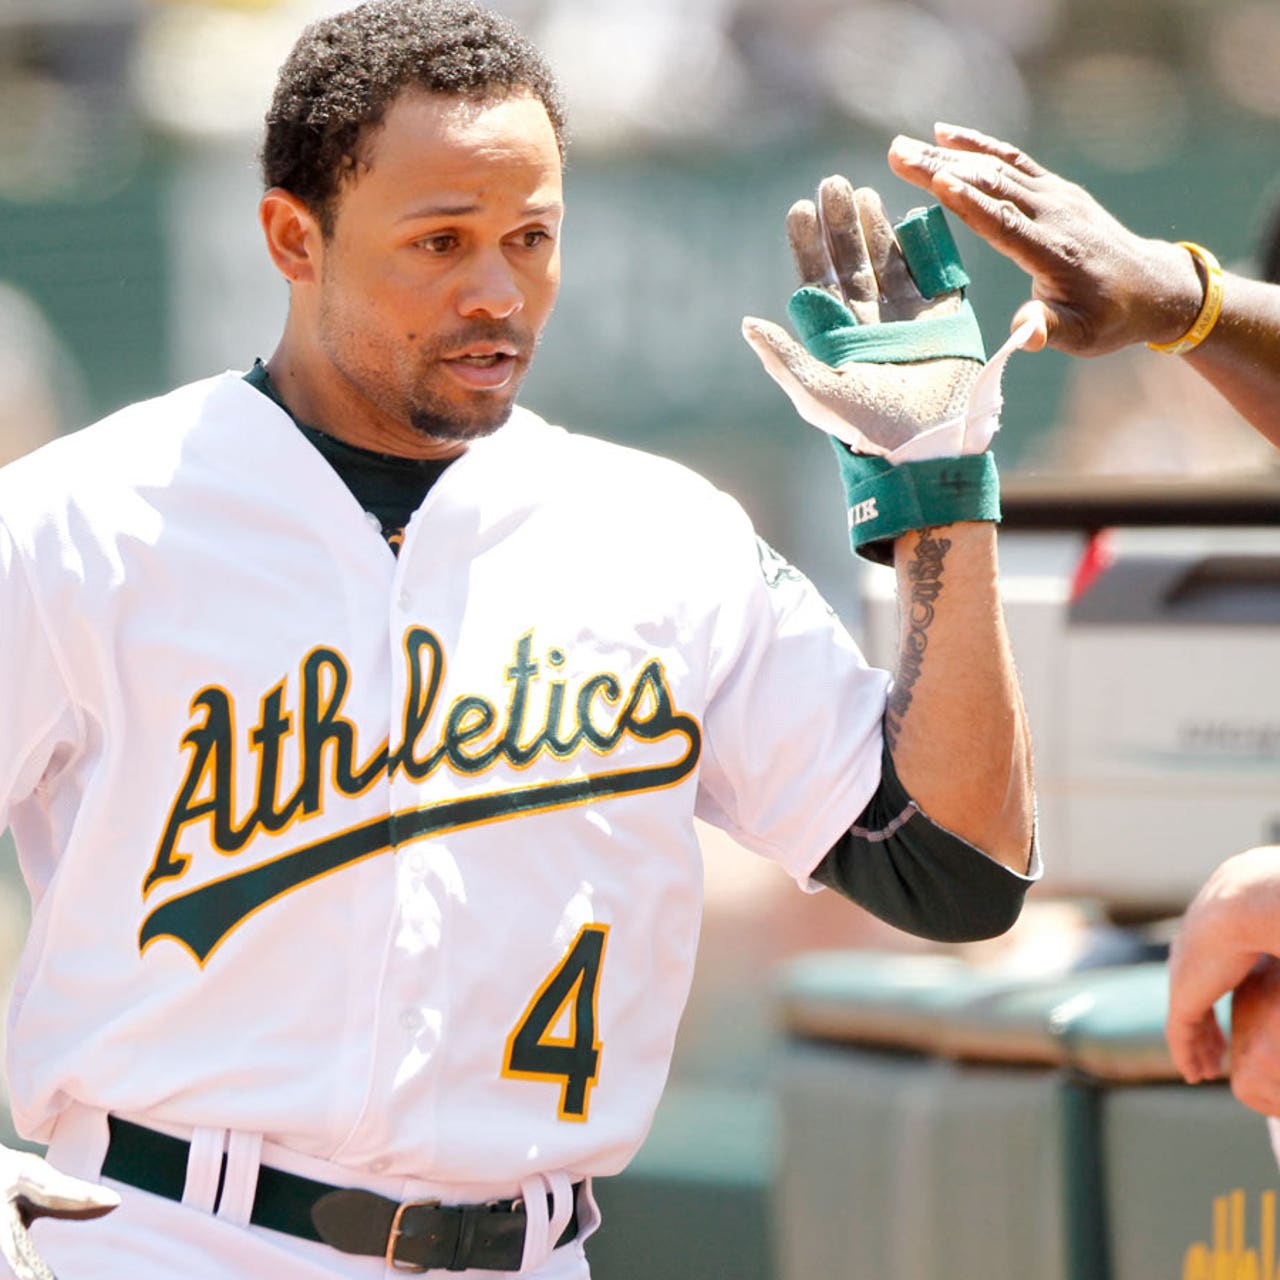 A's outfielder Coco Crisp to have elbow surgery, miss 6-8 weeks